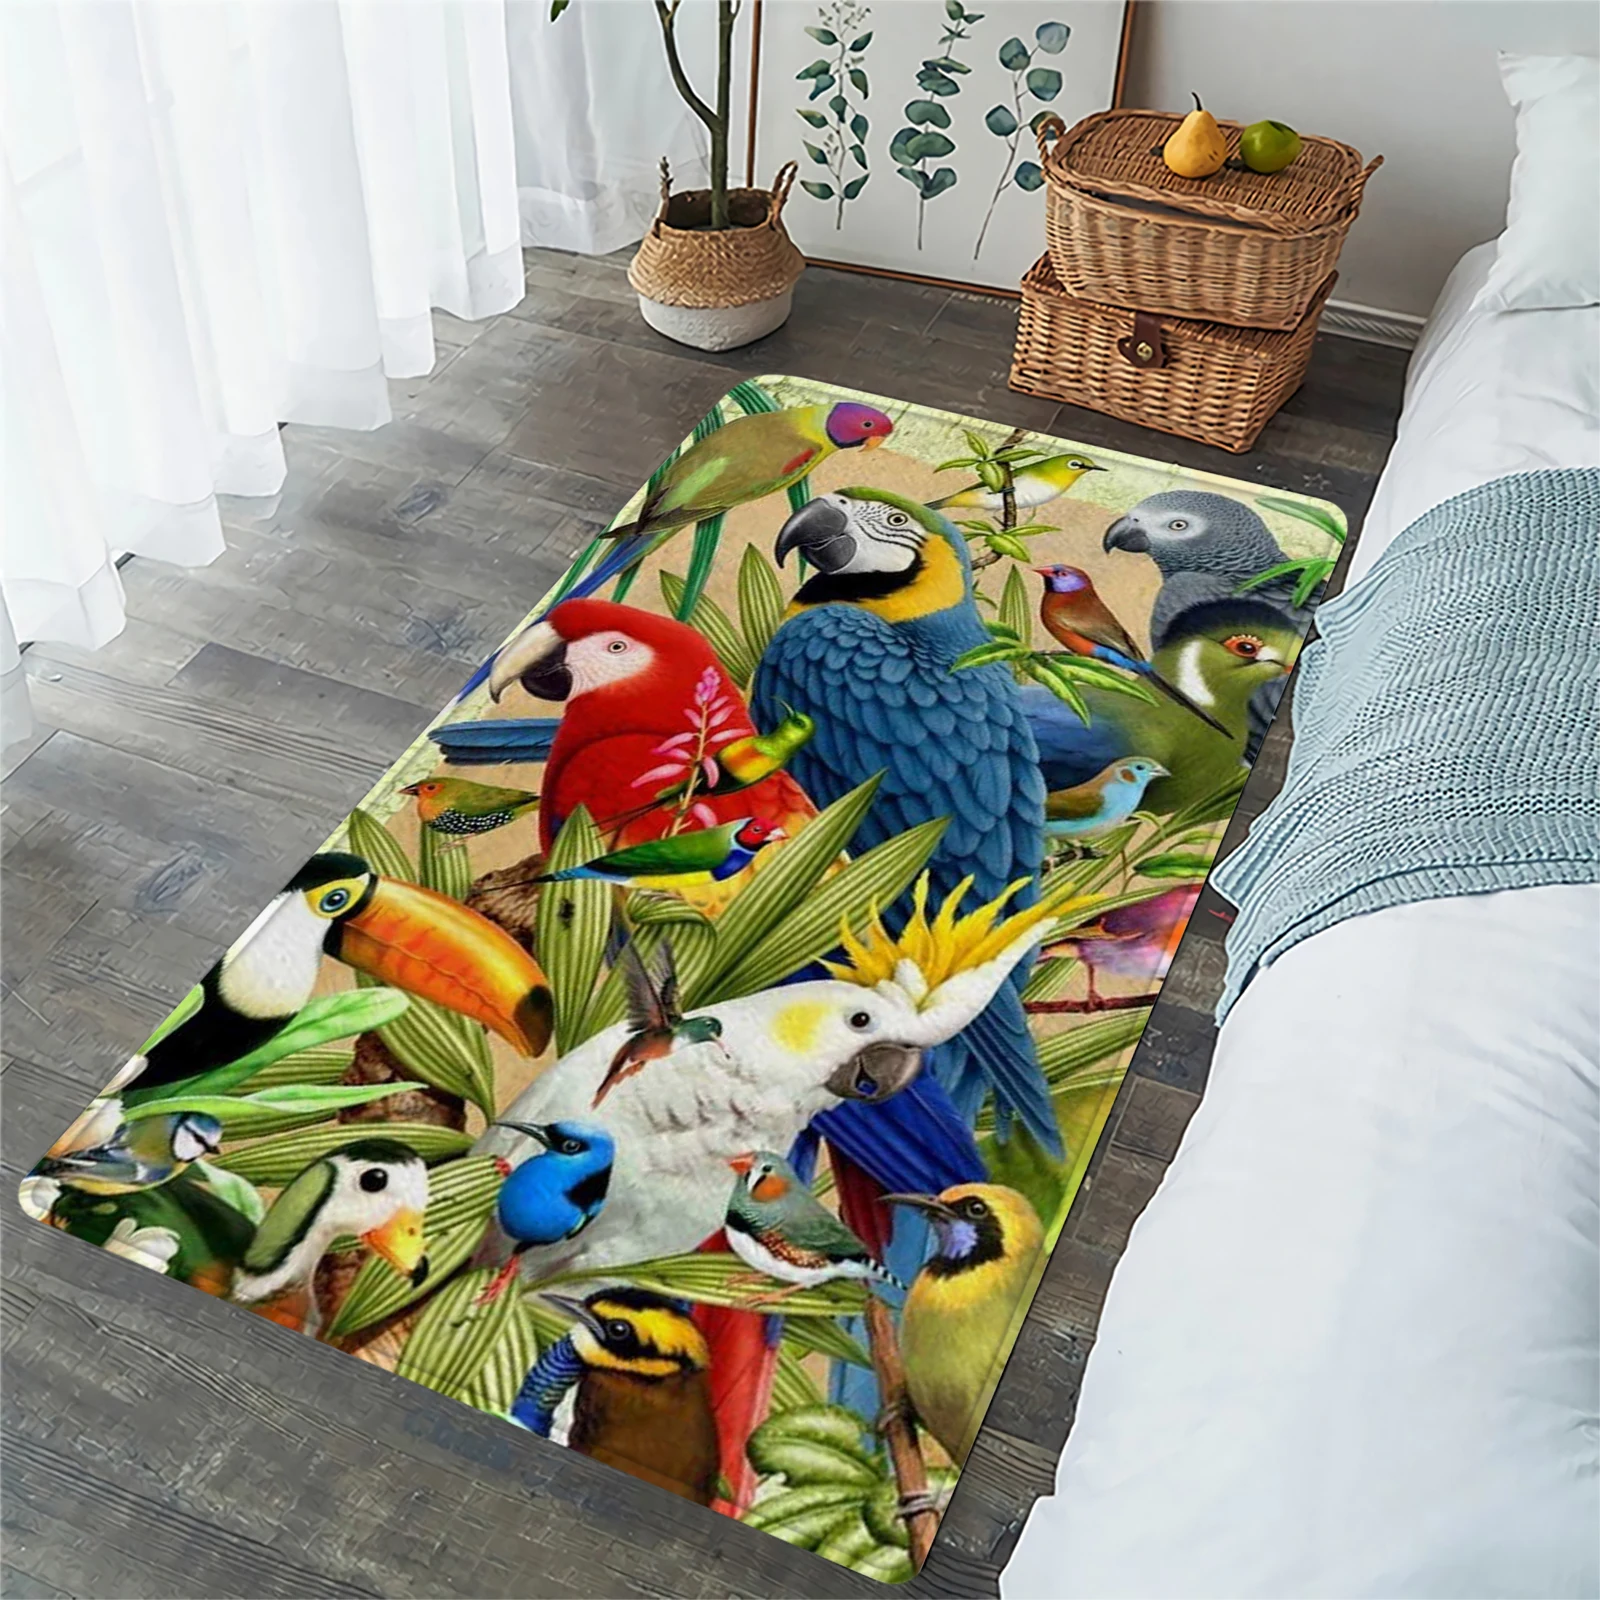 

CLOOCL Scarlet Macaw Printed Carpet Living Room Sofa Table Mats Area Rugs Washable Anti-slip Floor Mat Nordic Modern Rugs